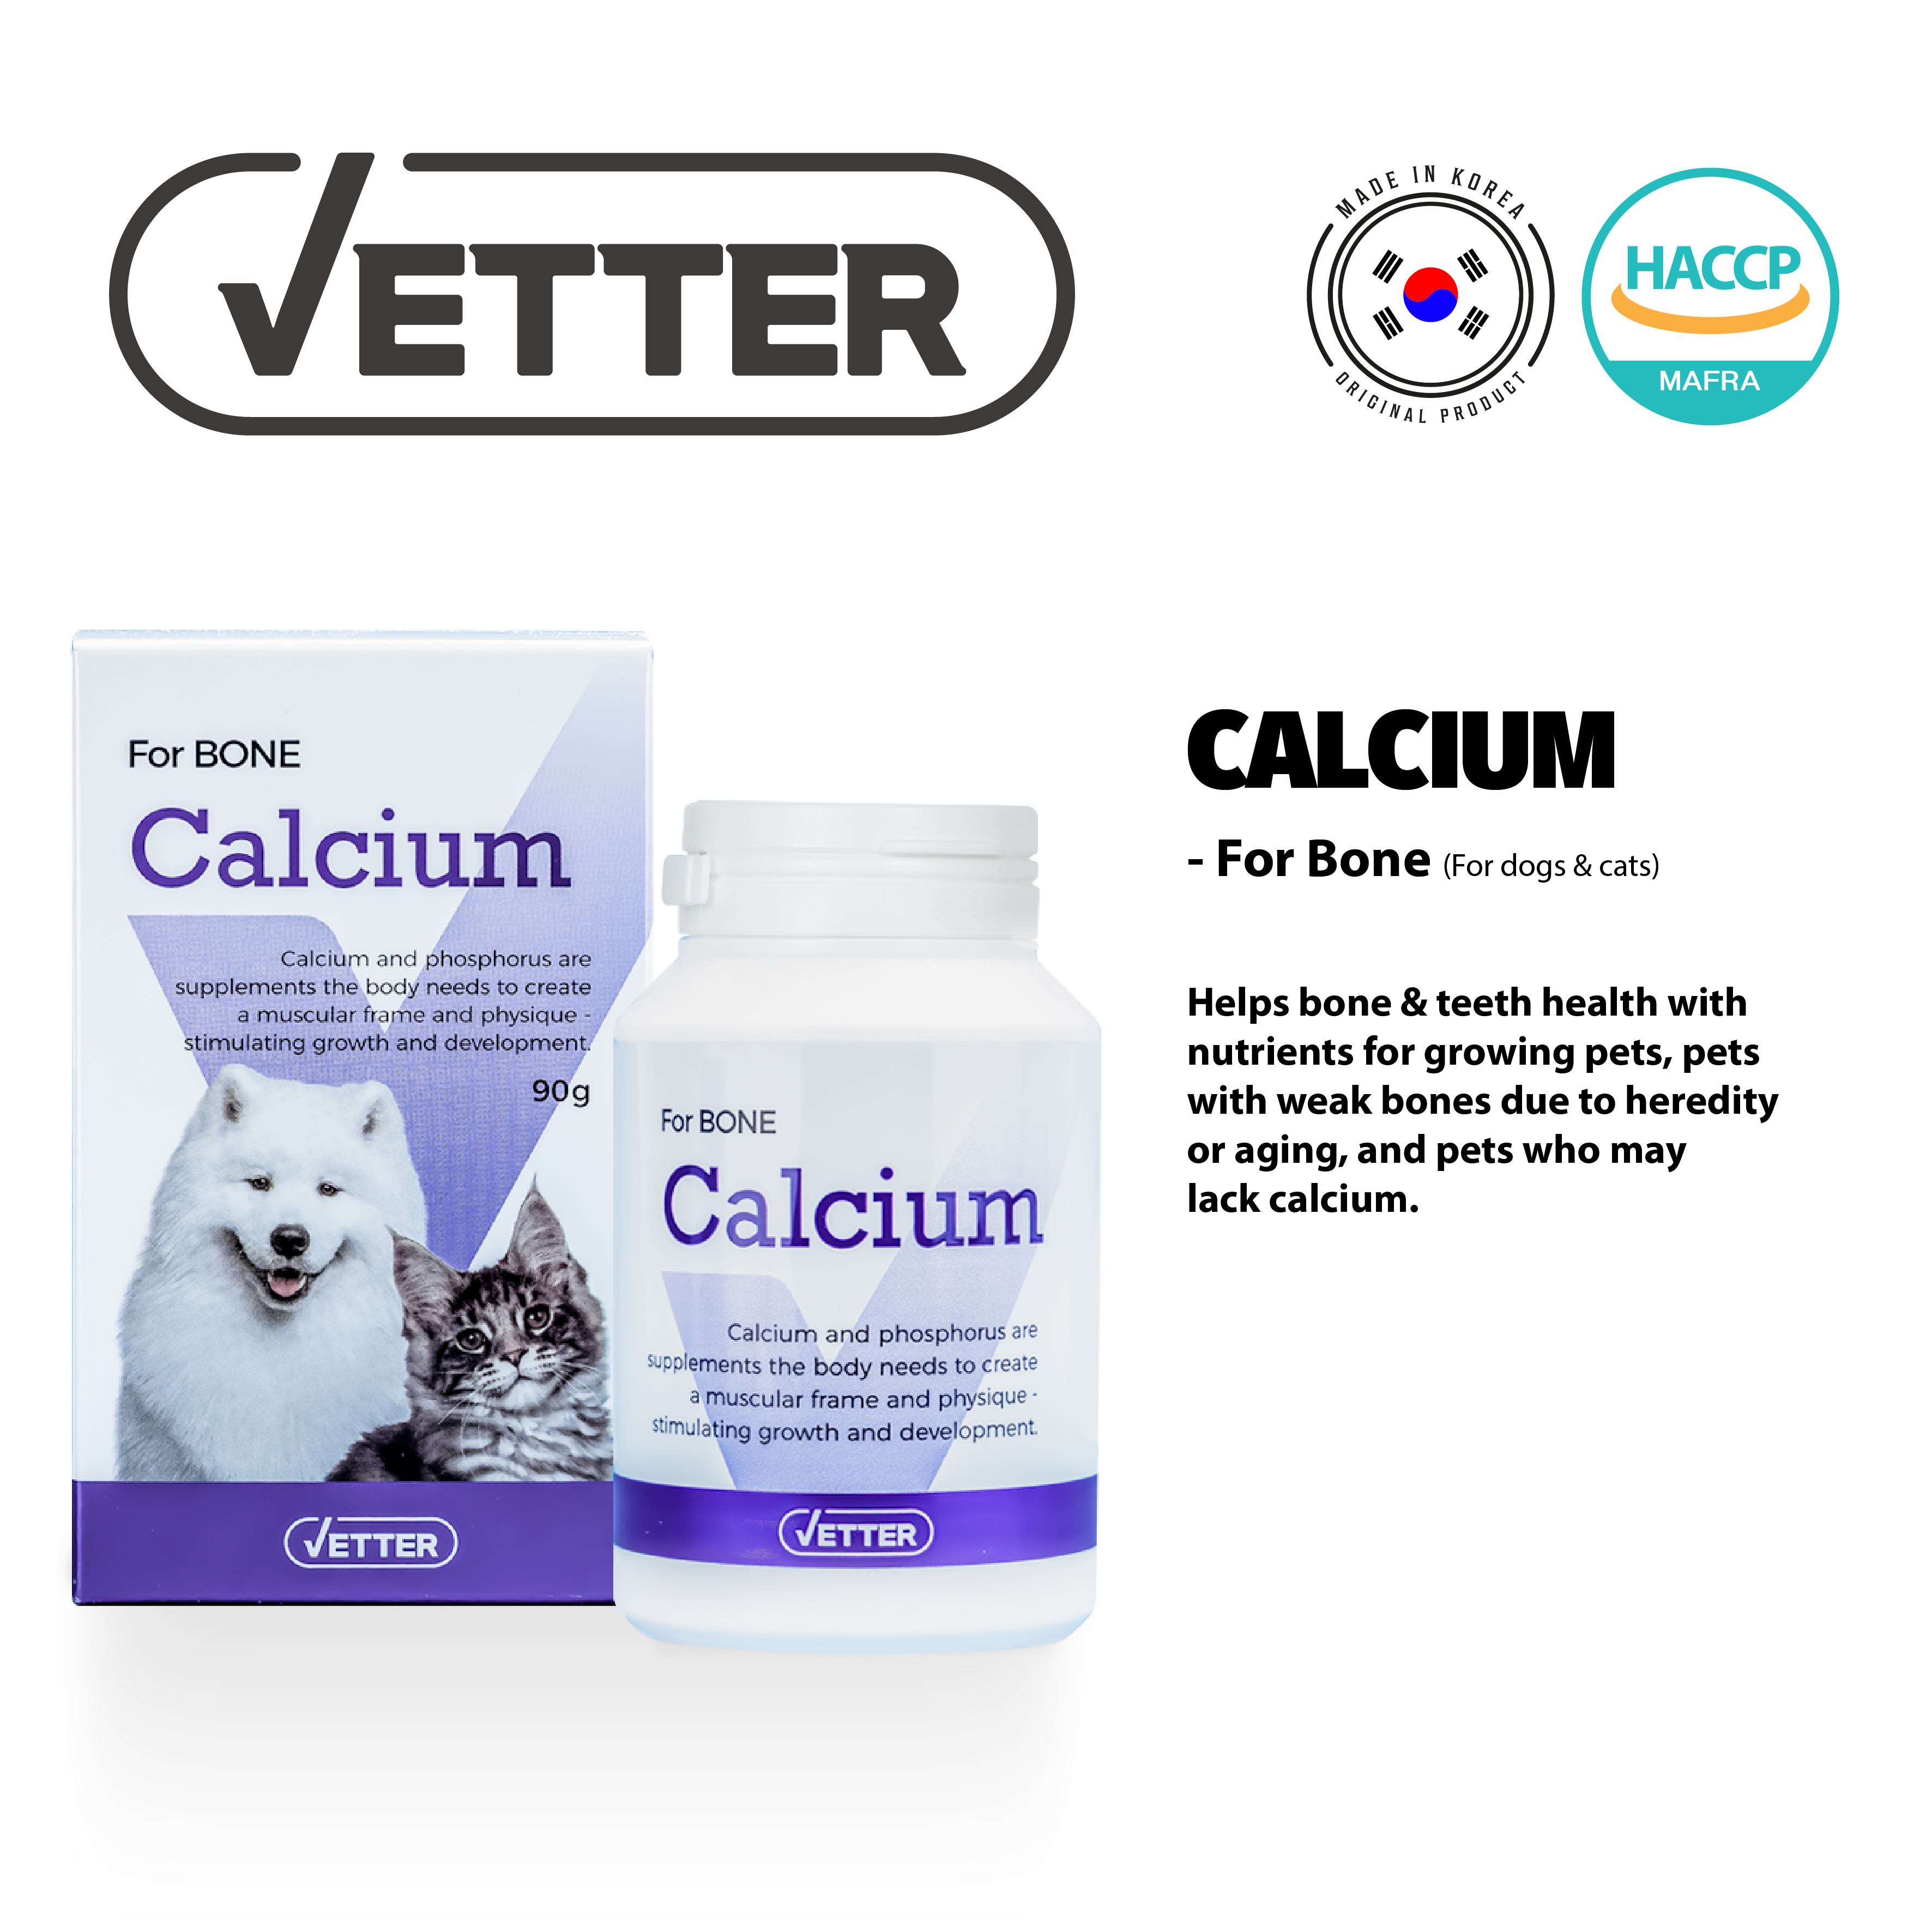 Vetter Dog and Cat Supplements